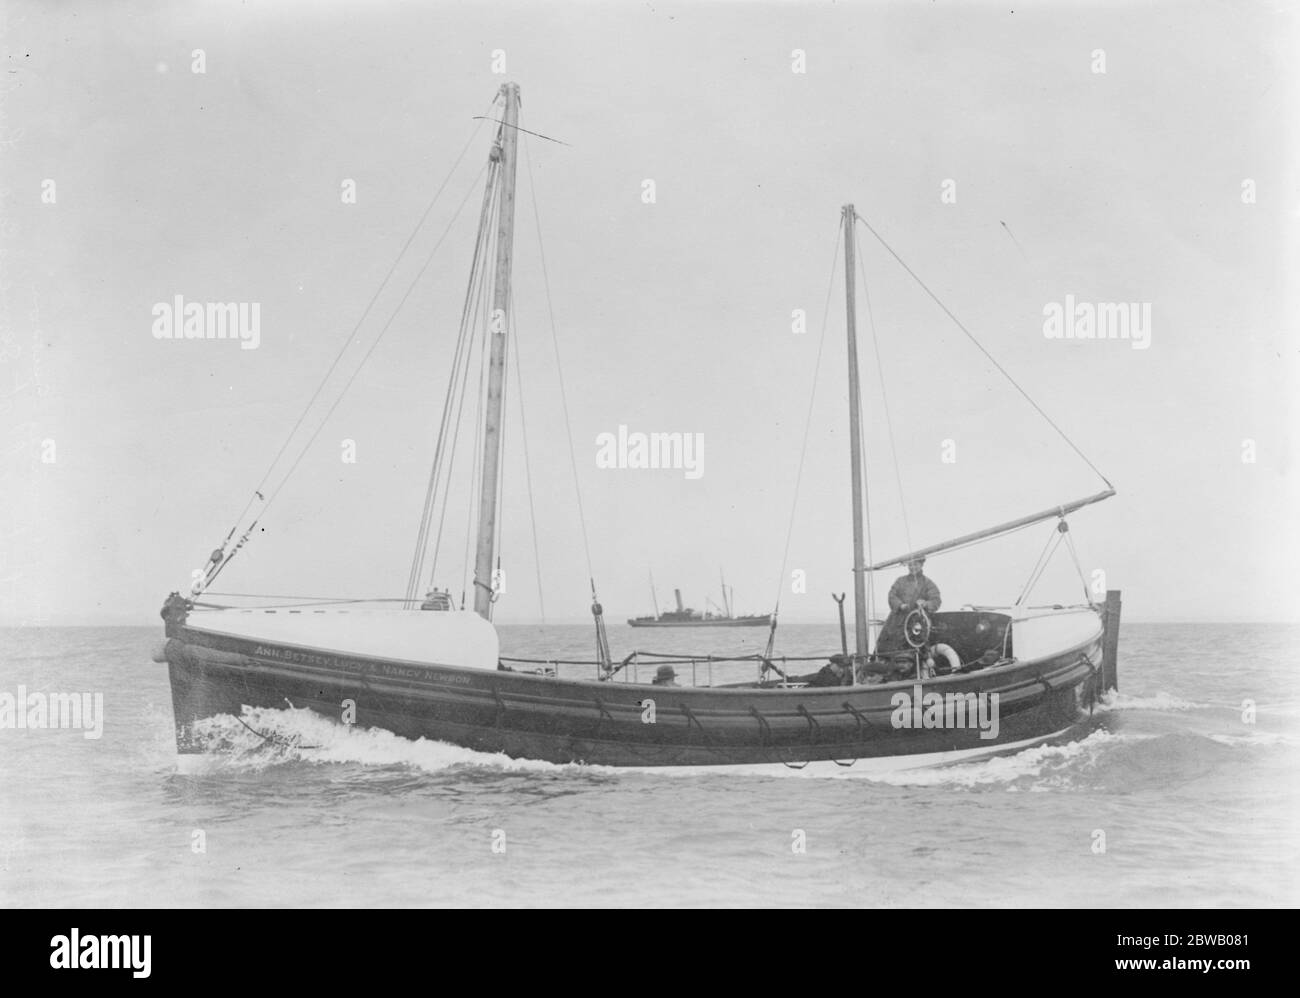 Motor Boat Ann Betsey Lucy and Nancy Newbon Built in 1922 and stationed at Sennen ' s Cove lands End The boat is self righting 40 ' x 10 ' 6 '' fitted with a taylor engine developing 45 hp and on trial showed a speed of 71 / 2 knots 3 May 1922 Stock Photo